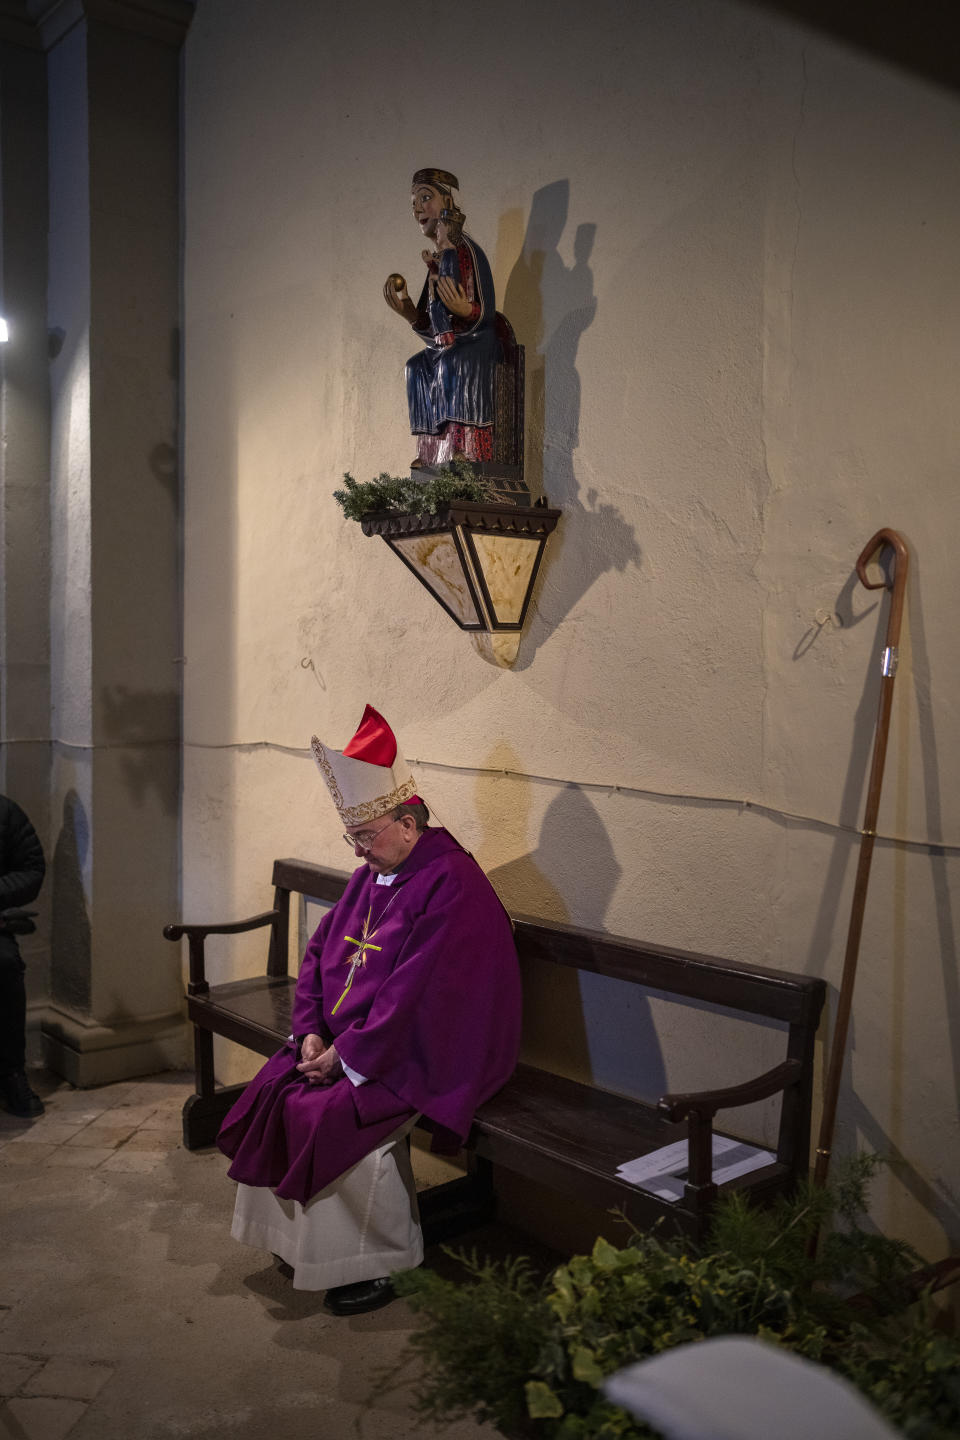 Local bishop Francesc Conesa sits next to the virgin Our Lady of the Torrents as he leads a mass in l'Espunyola, north of Barcelona, Spain, Sunday, March 26, 2023. Farmers and parishioners gathered Sunday at the small hermitage of l'Espunyola, a rural village in Catalonia, to attend a mass asking the local virgin Our Lady of the Torrents for rain. The eastern Spanish region is among the worst affected by the severe drought that hits the whole of the Mediterranean country. (AP Photo/Emilio Morenatti)